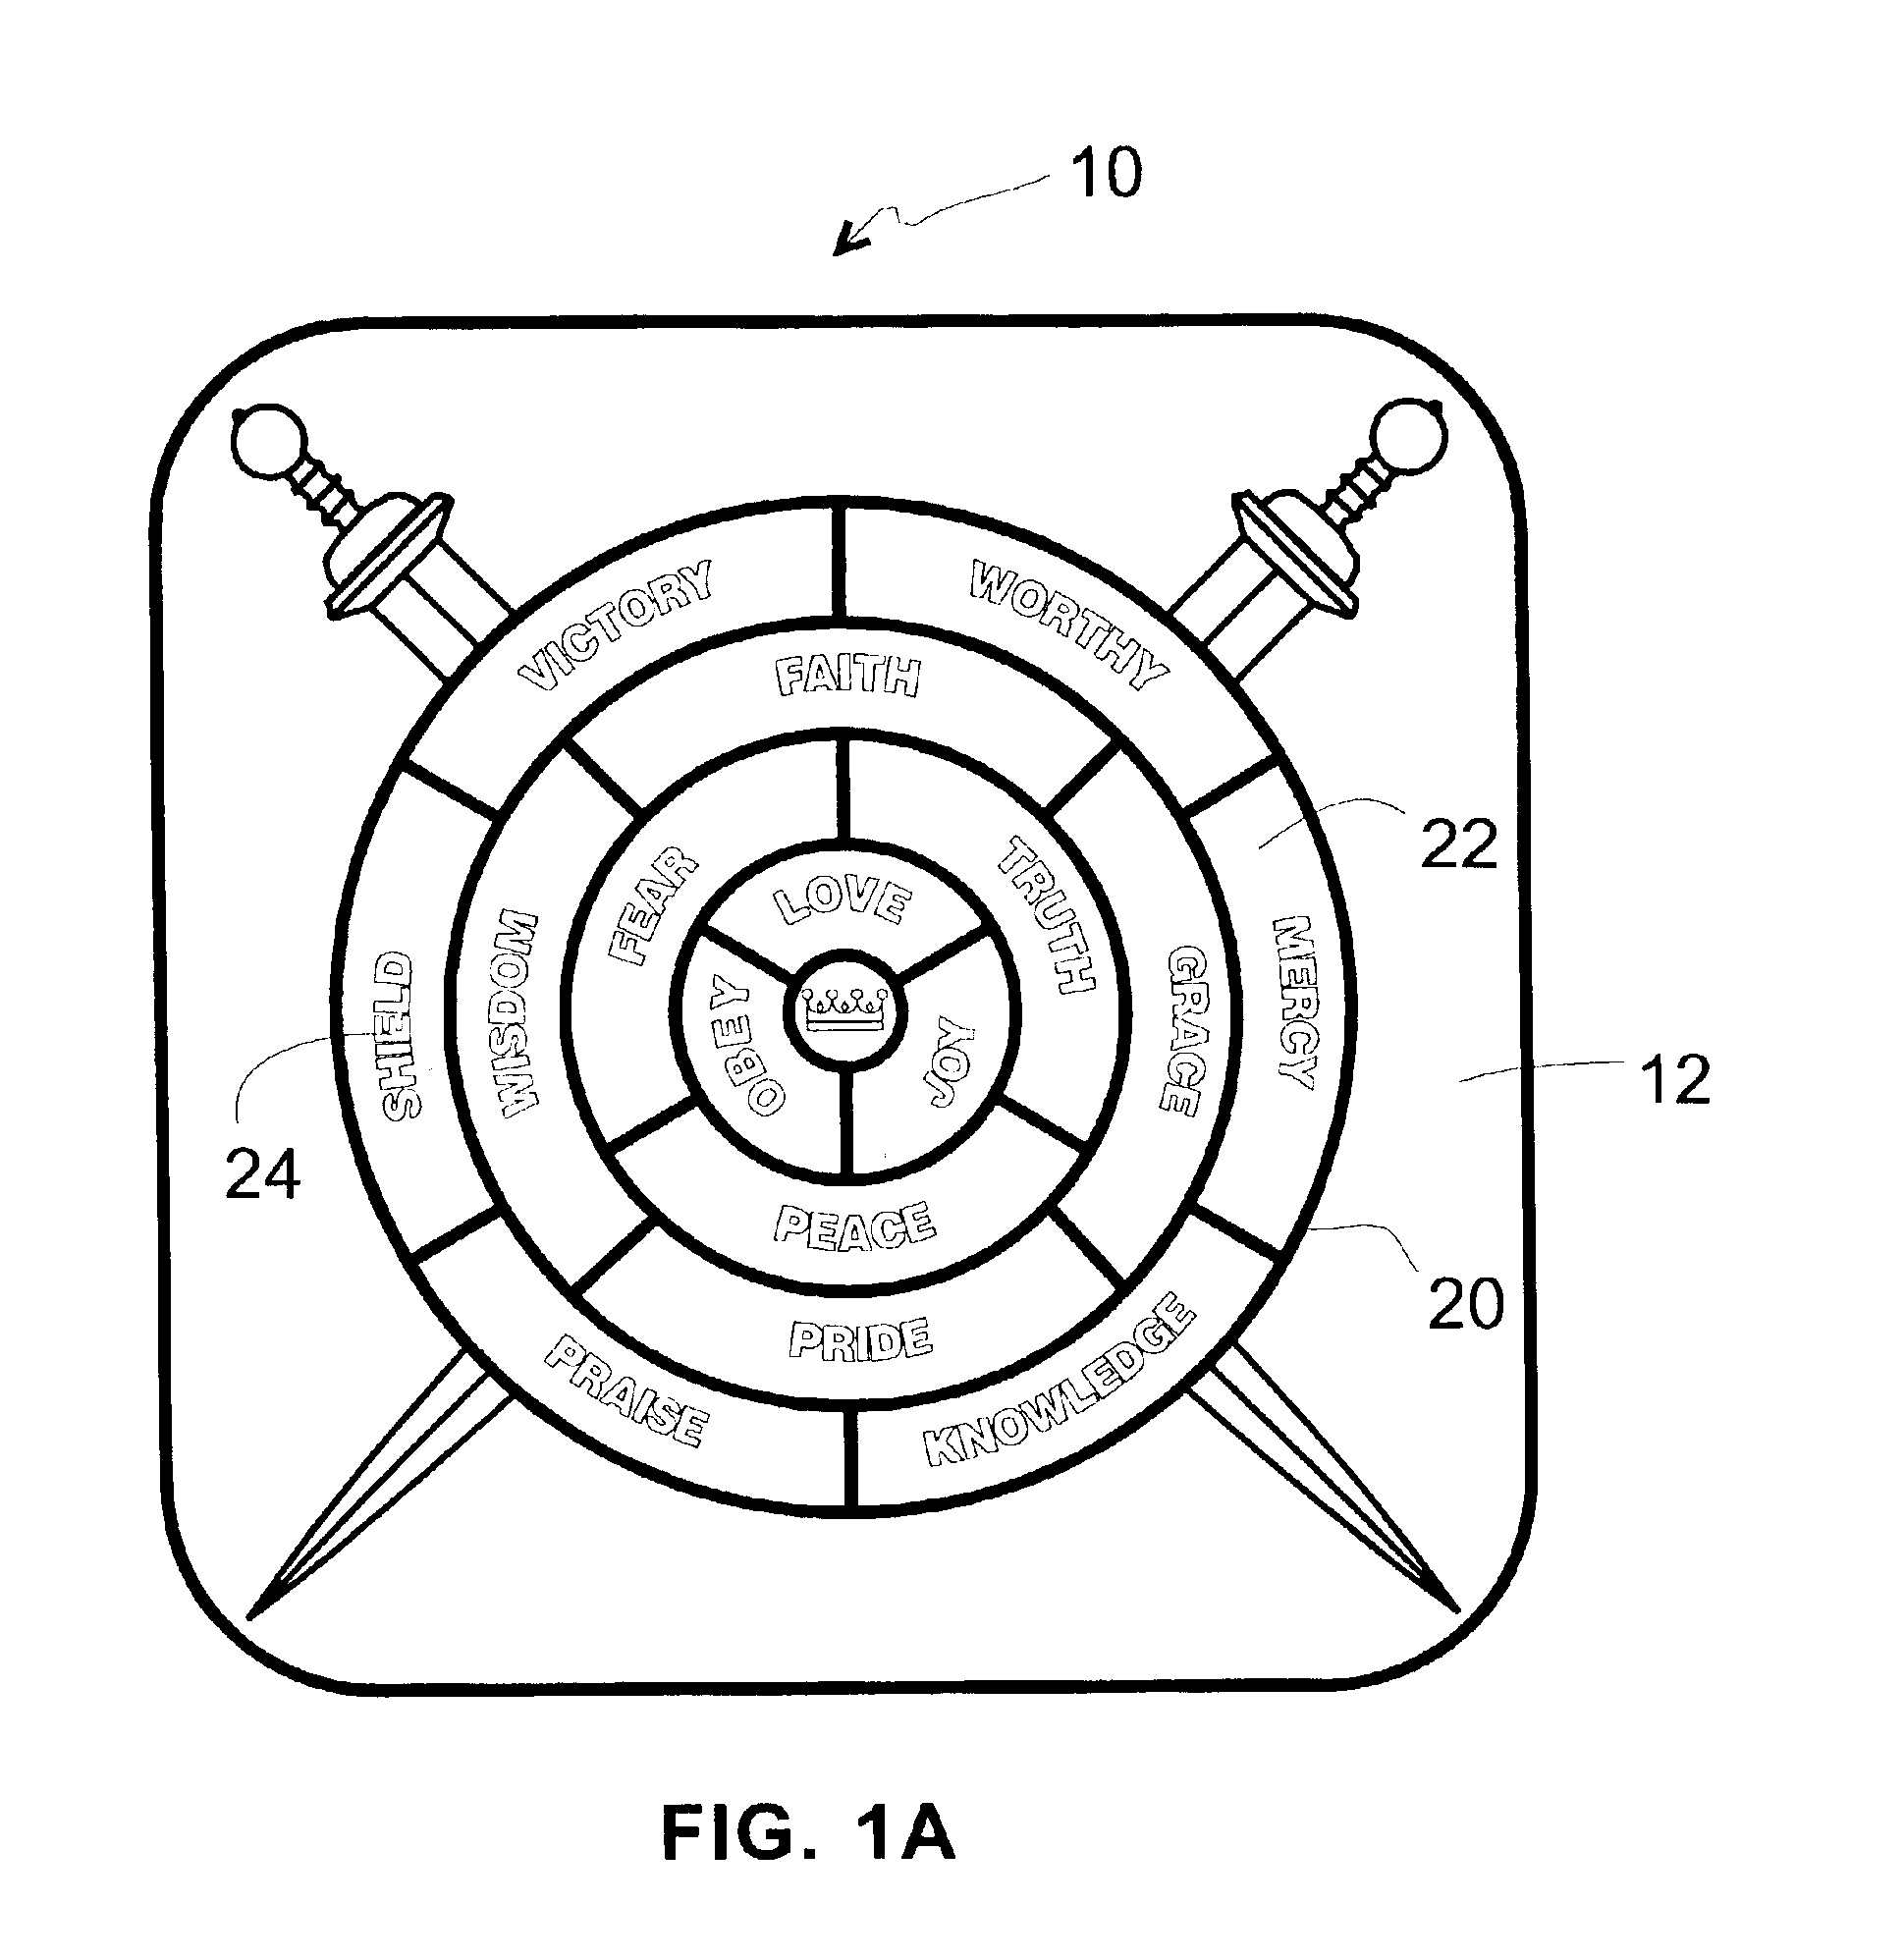 Method and apparatus for a learning system